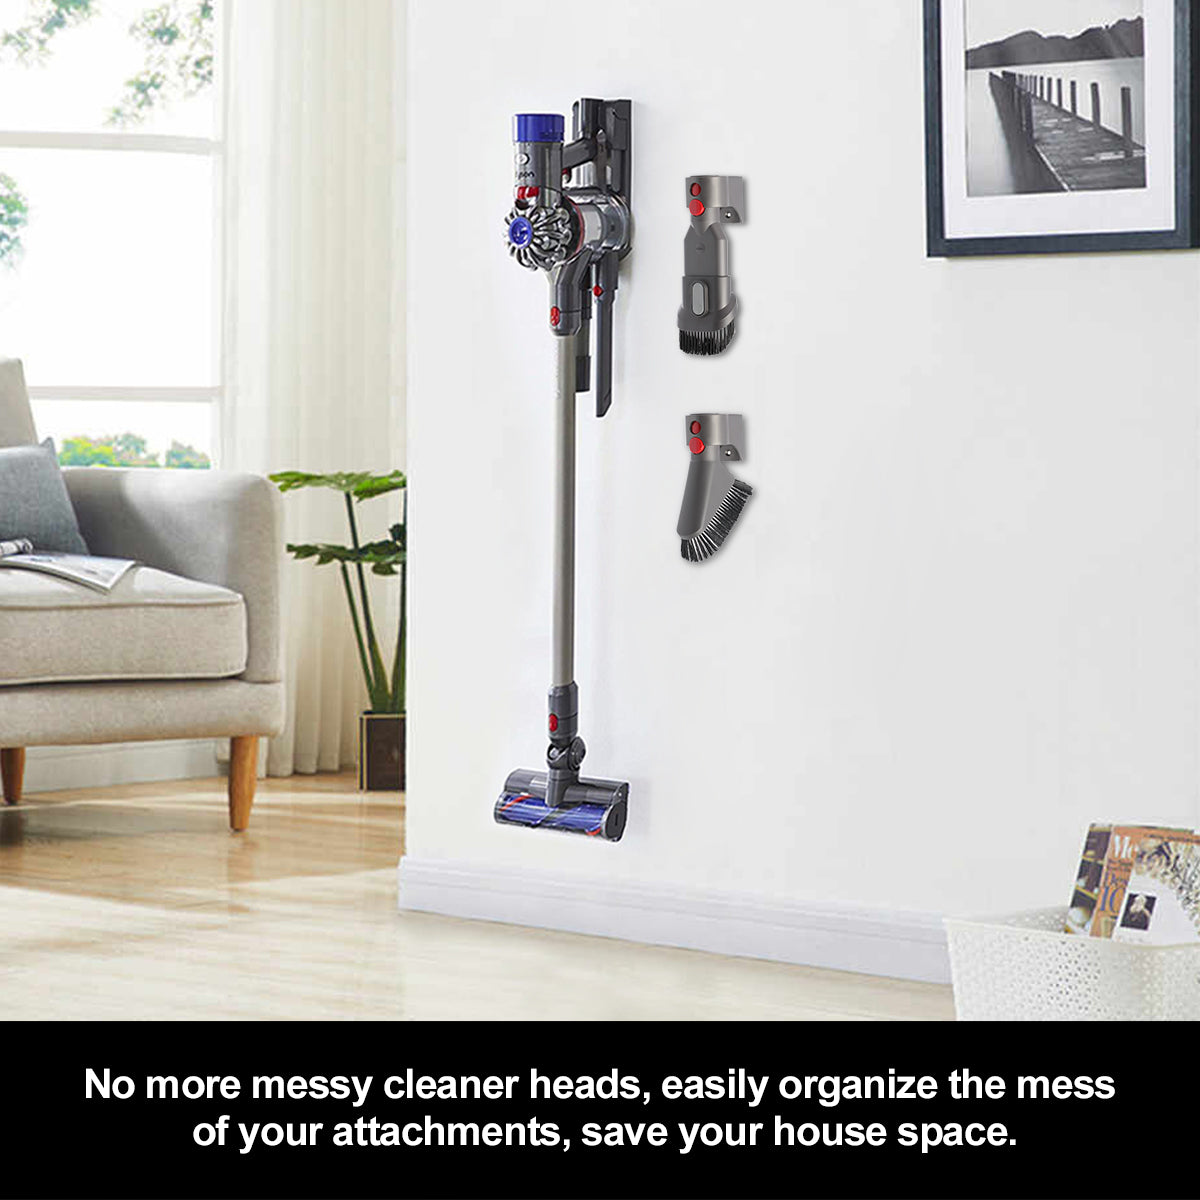 no more messy cleaner heads, easily organize the mess of your attachements, save your house space